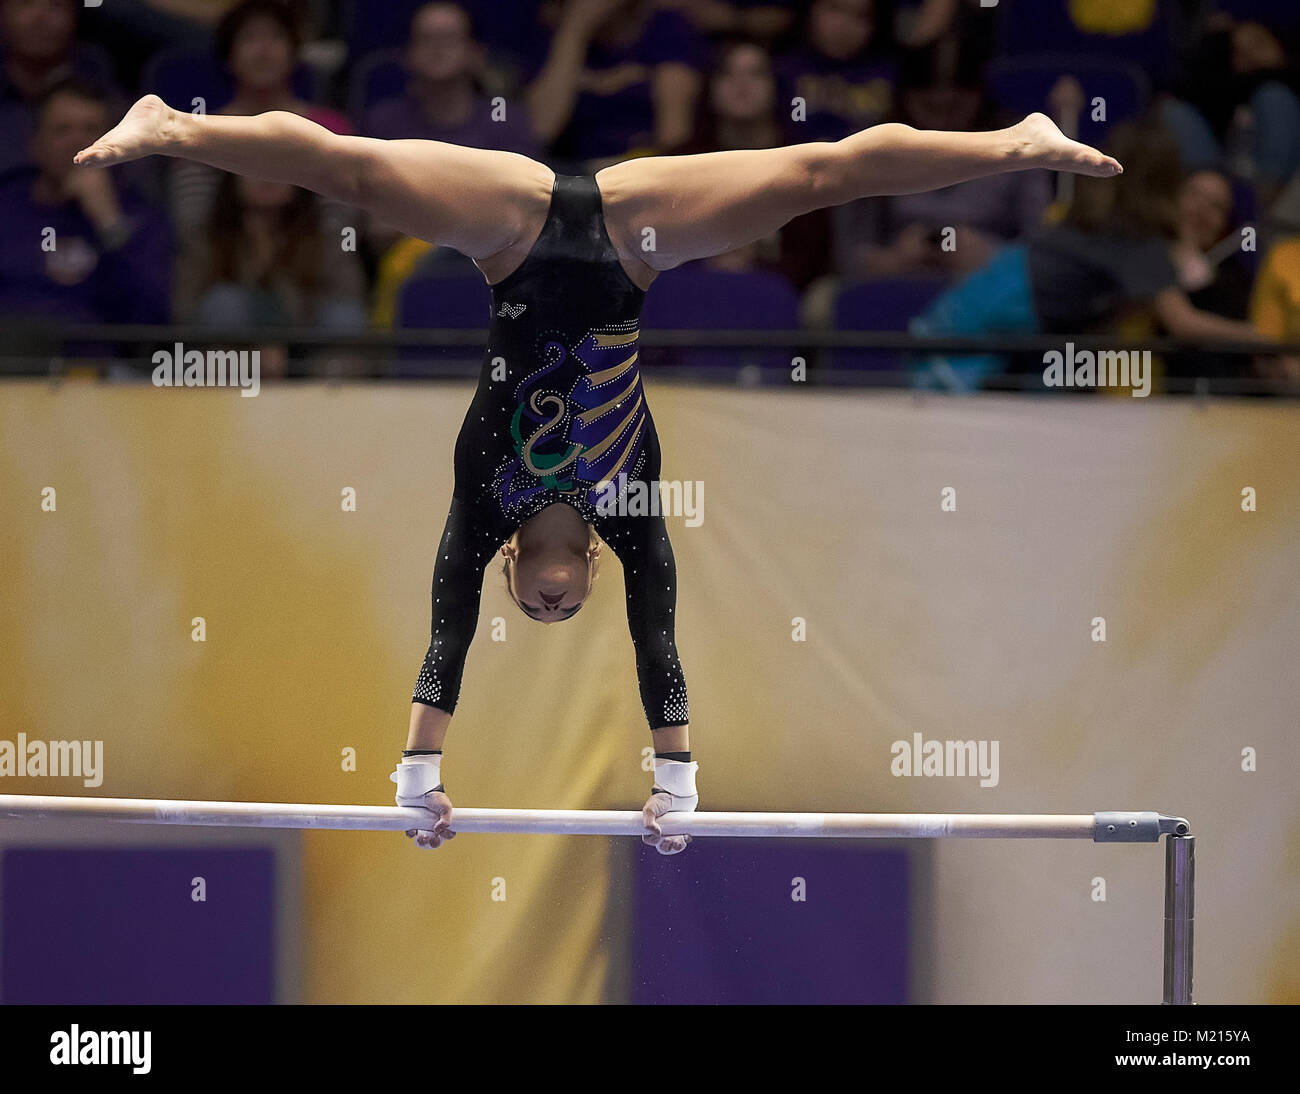 Baton Rouge, LA, USA. 2nd Feb, 2018. LSU gymnast Myia Hambrick performs on the uneven bars during the meet between LSU and Kentucky at Pete Maravich Assembly Center in Baton Rouge, LA. Stephen Lew/CSM/Alamy Live News Stock Photo